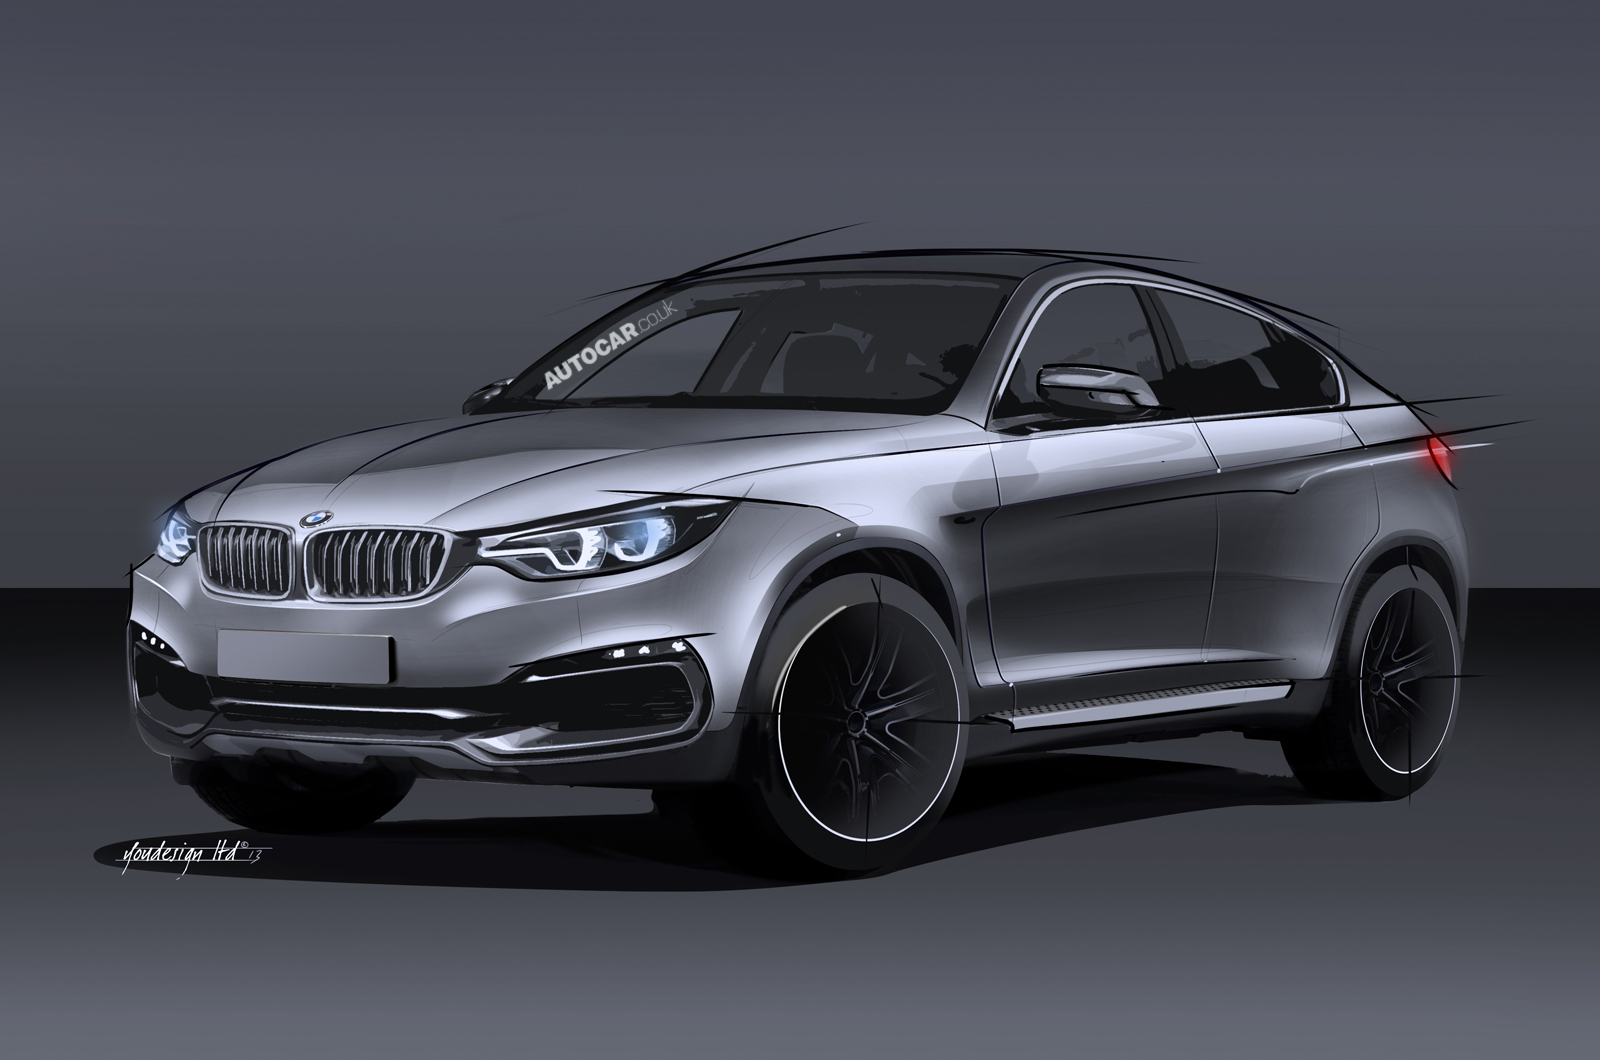 Wallpapers bmw x6 concept on the desktop